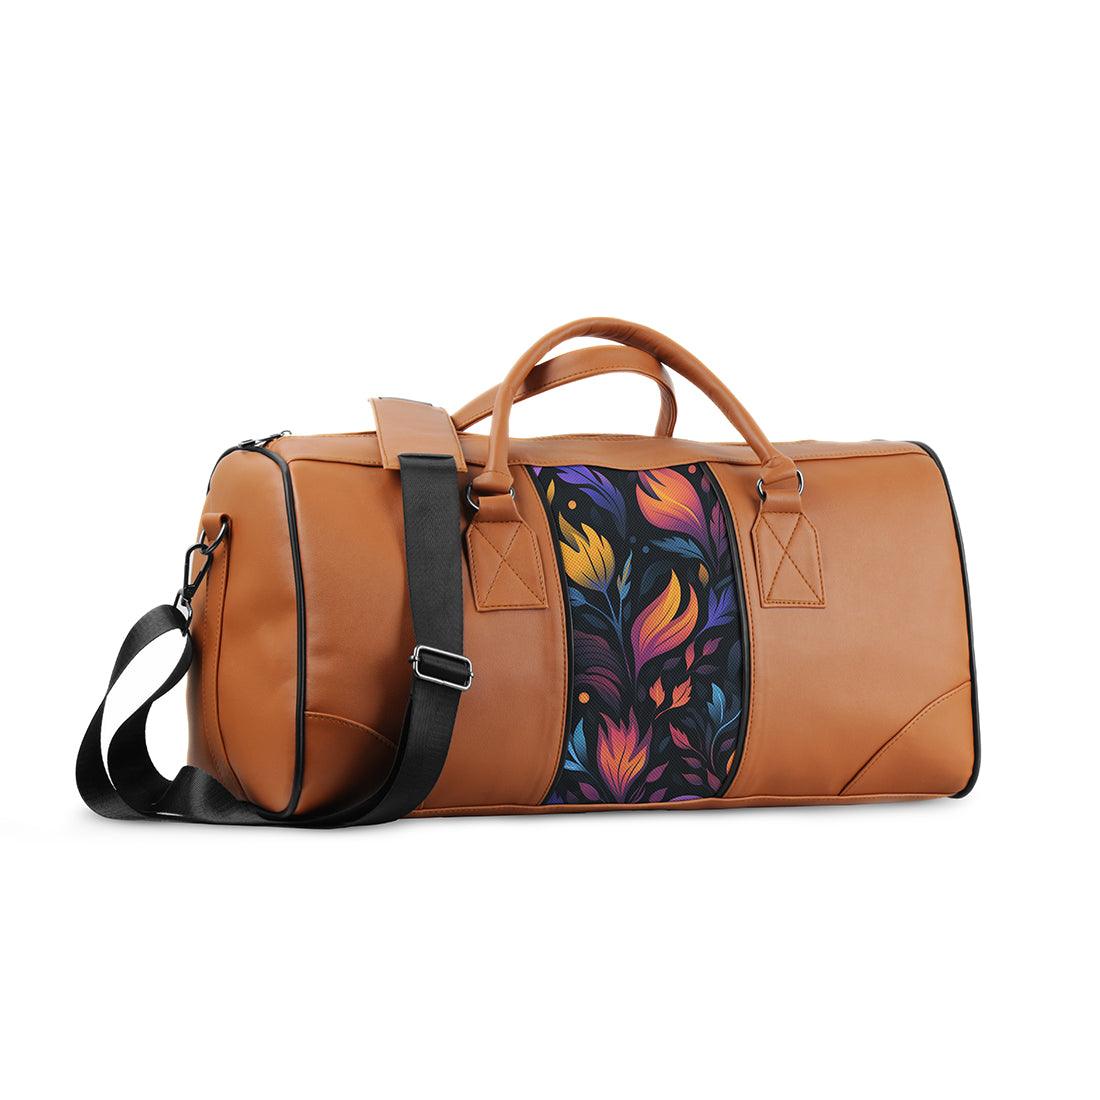 Mixed Duffel Bag Nocturnal Blooms - CANVAEGYPT